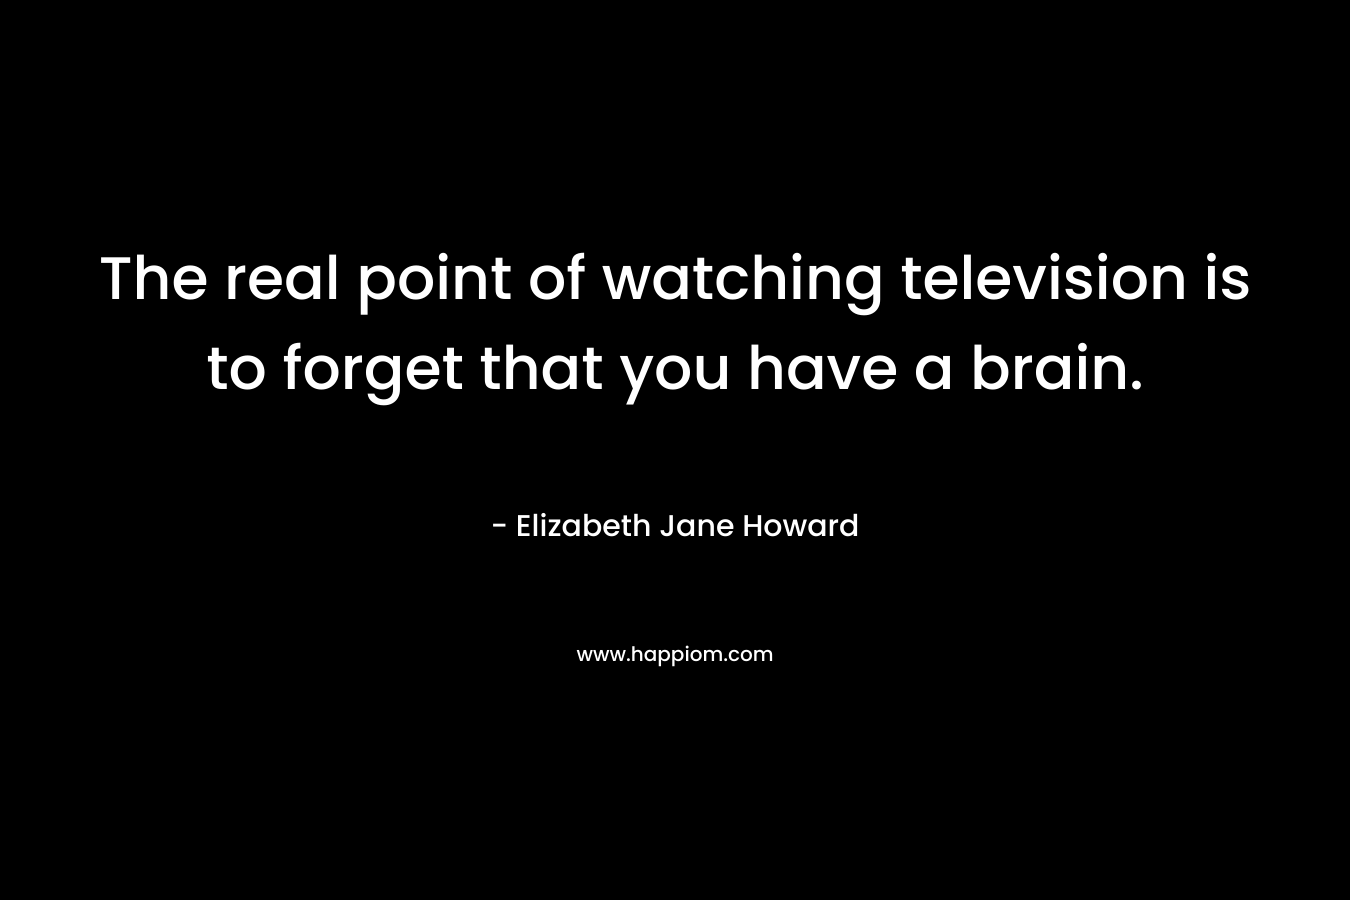 The real point of watching television is to forget that you have a brain. – Elizabeth Jane Howard